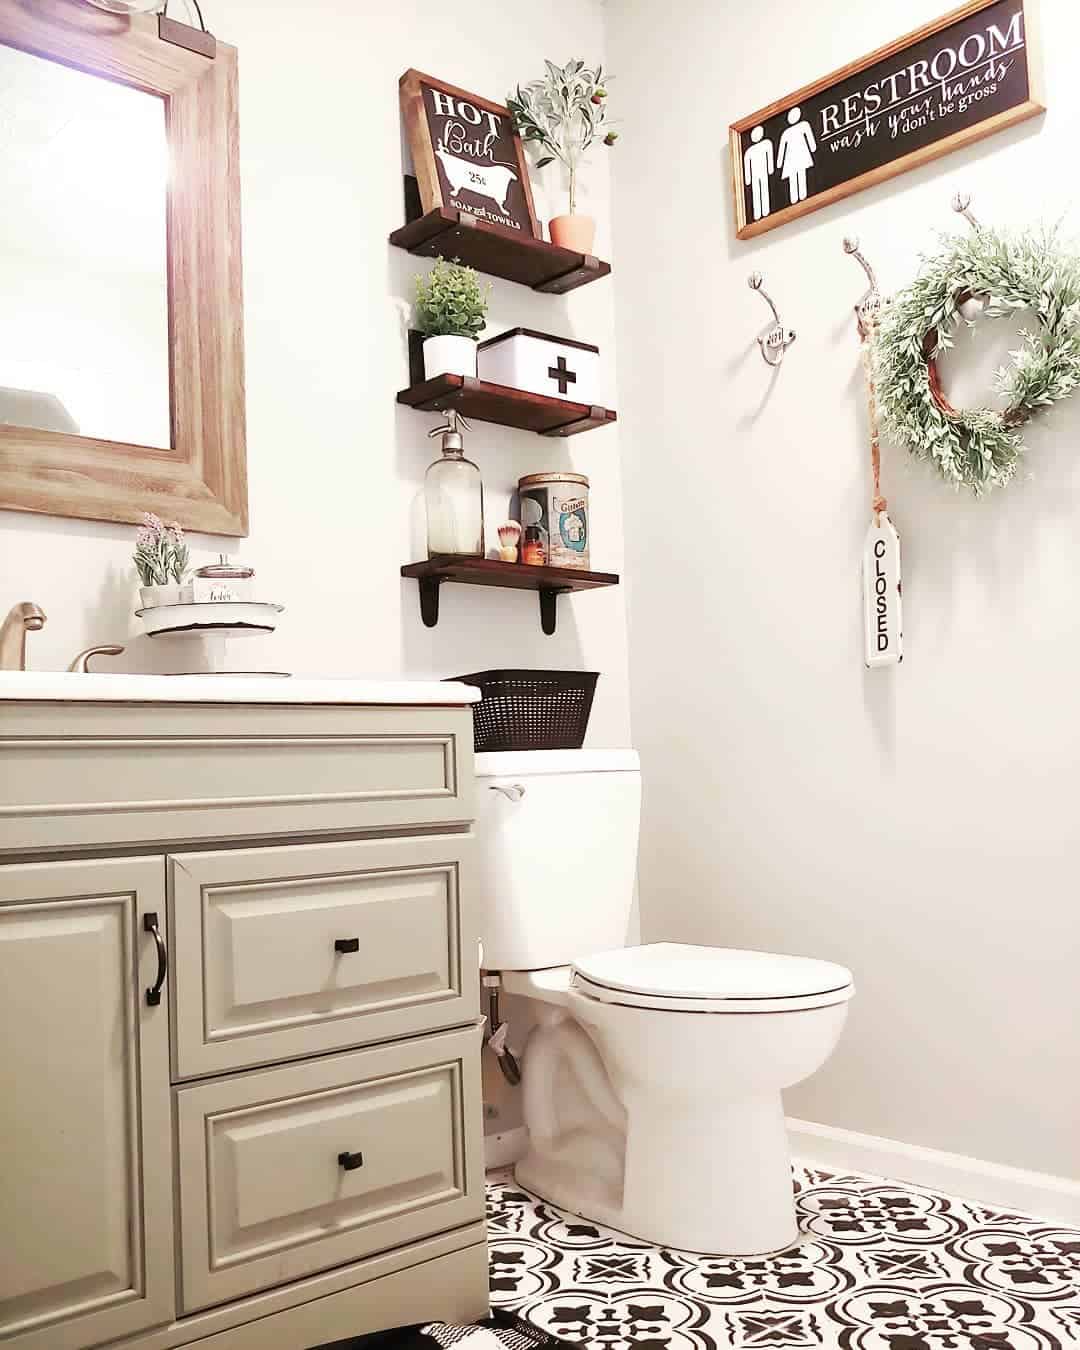 Wood Accents With a Grey Bathroom Cabinet - Soul & Lane